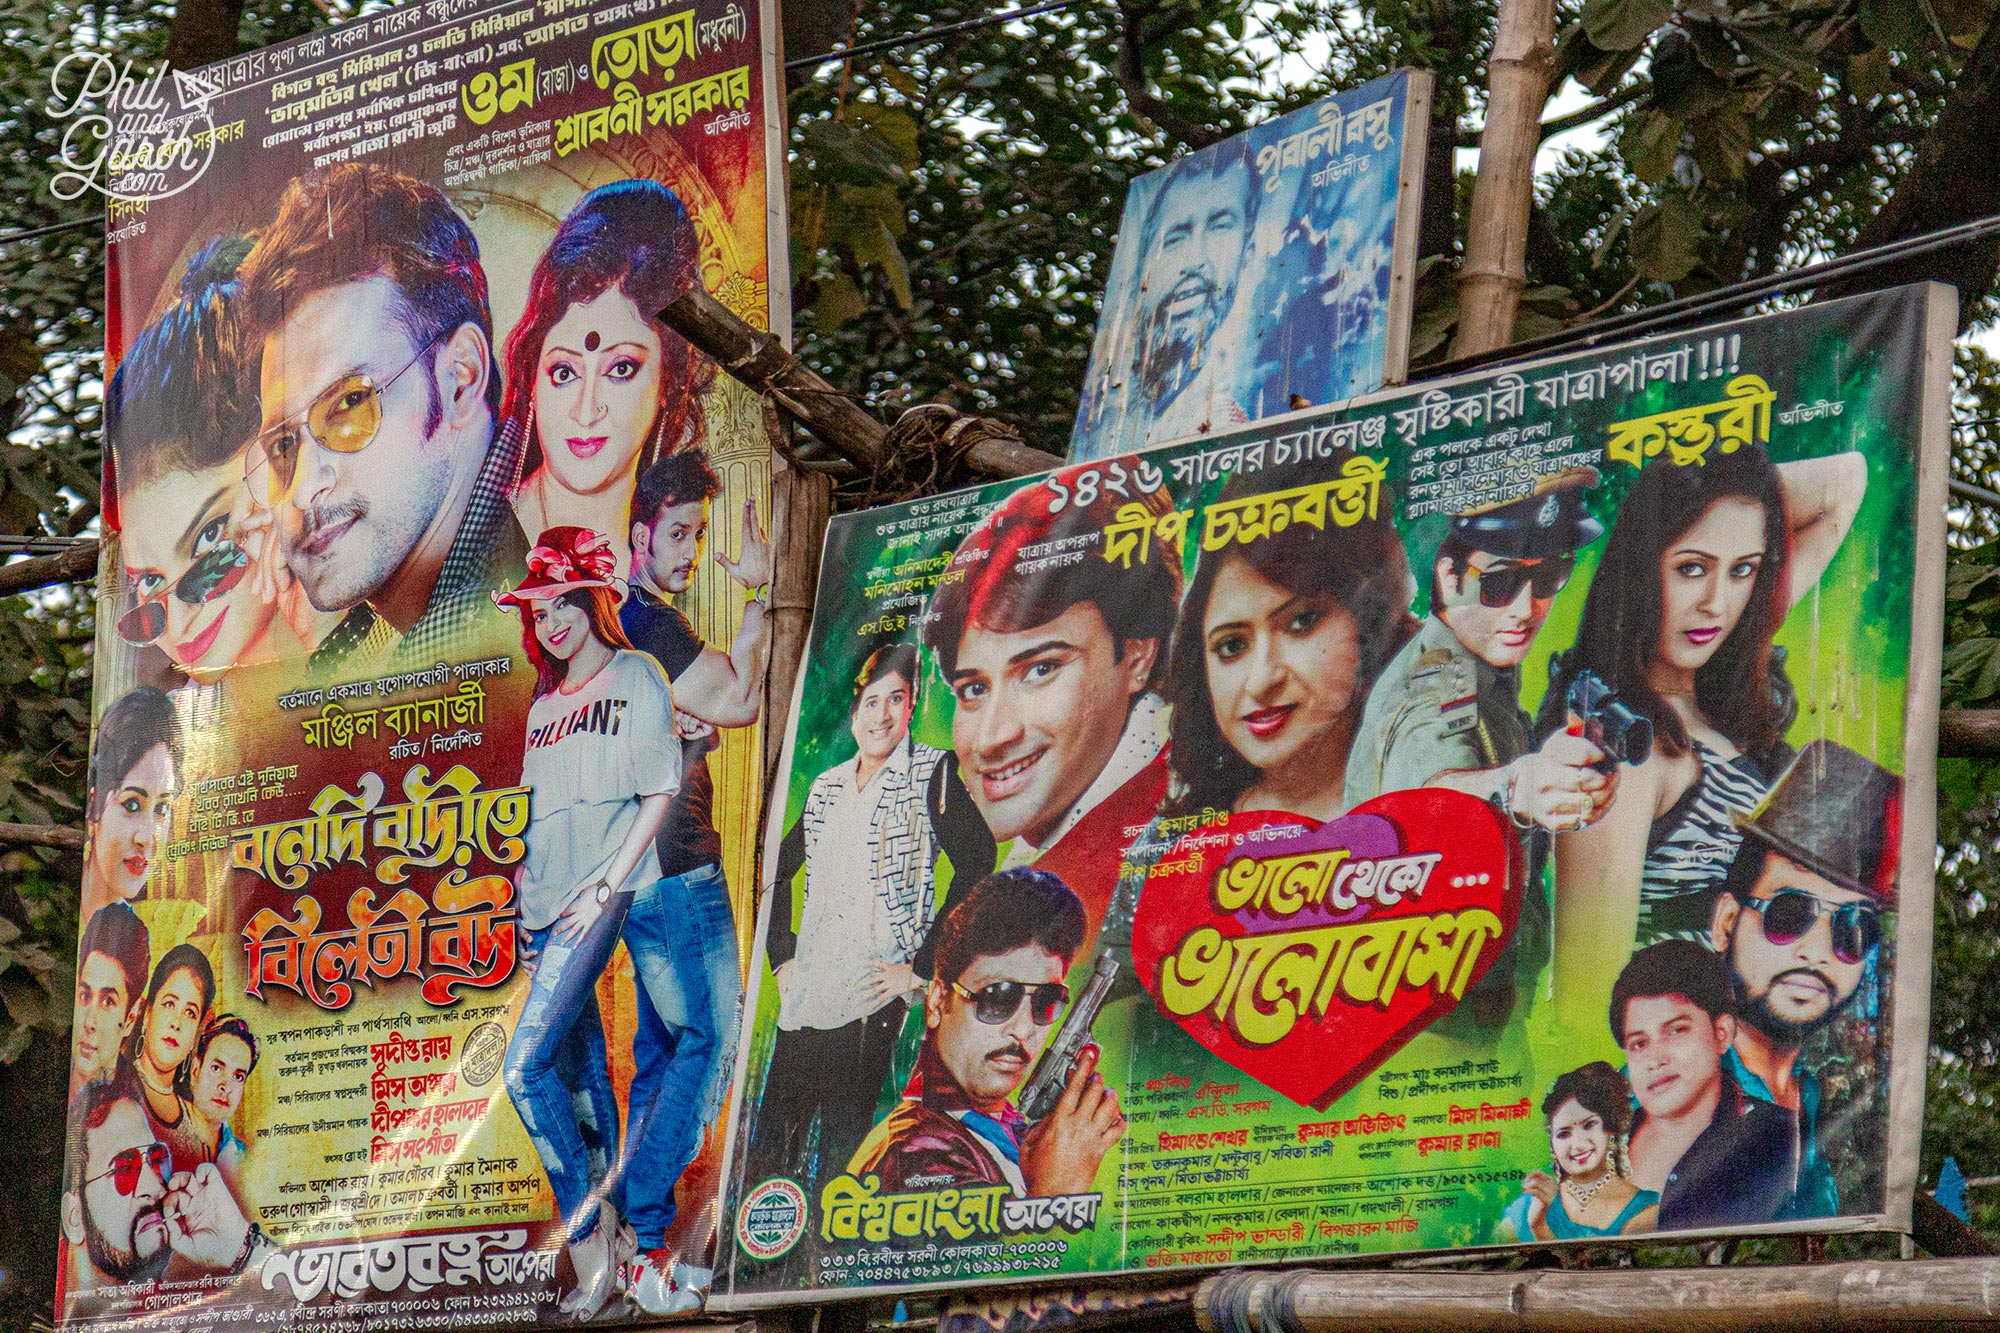 So many posters in this area - assuming these are advertising Bollywood films